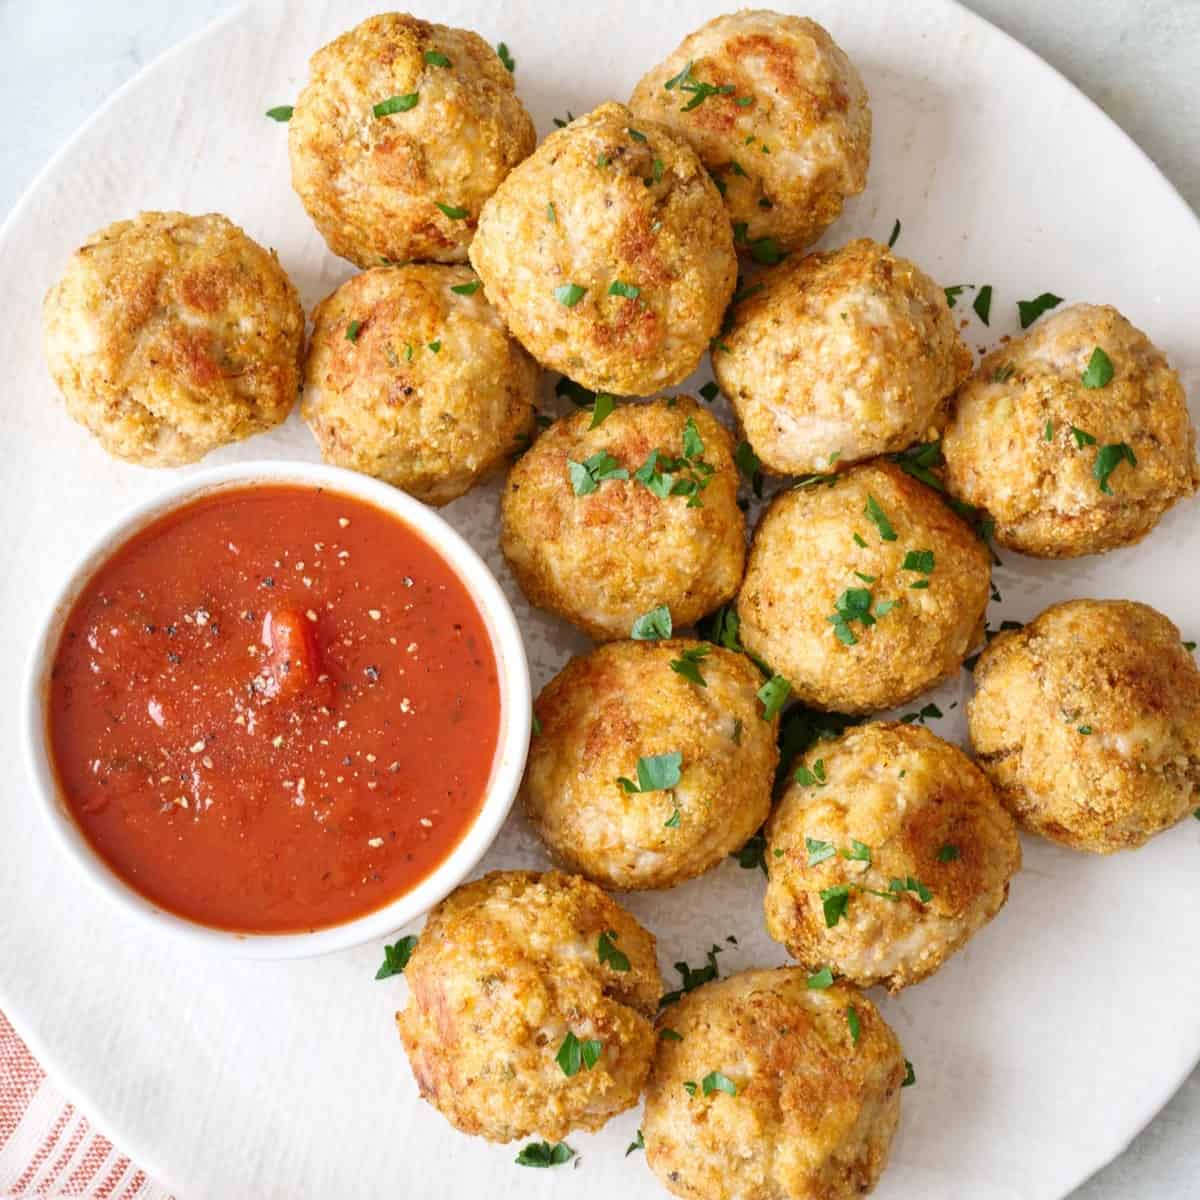 Baked chicken meatballs on a plate with a side of marinara sauce.